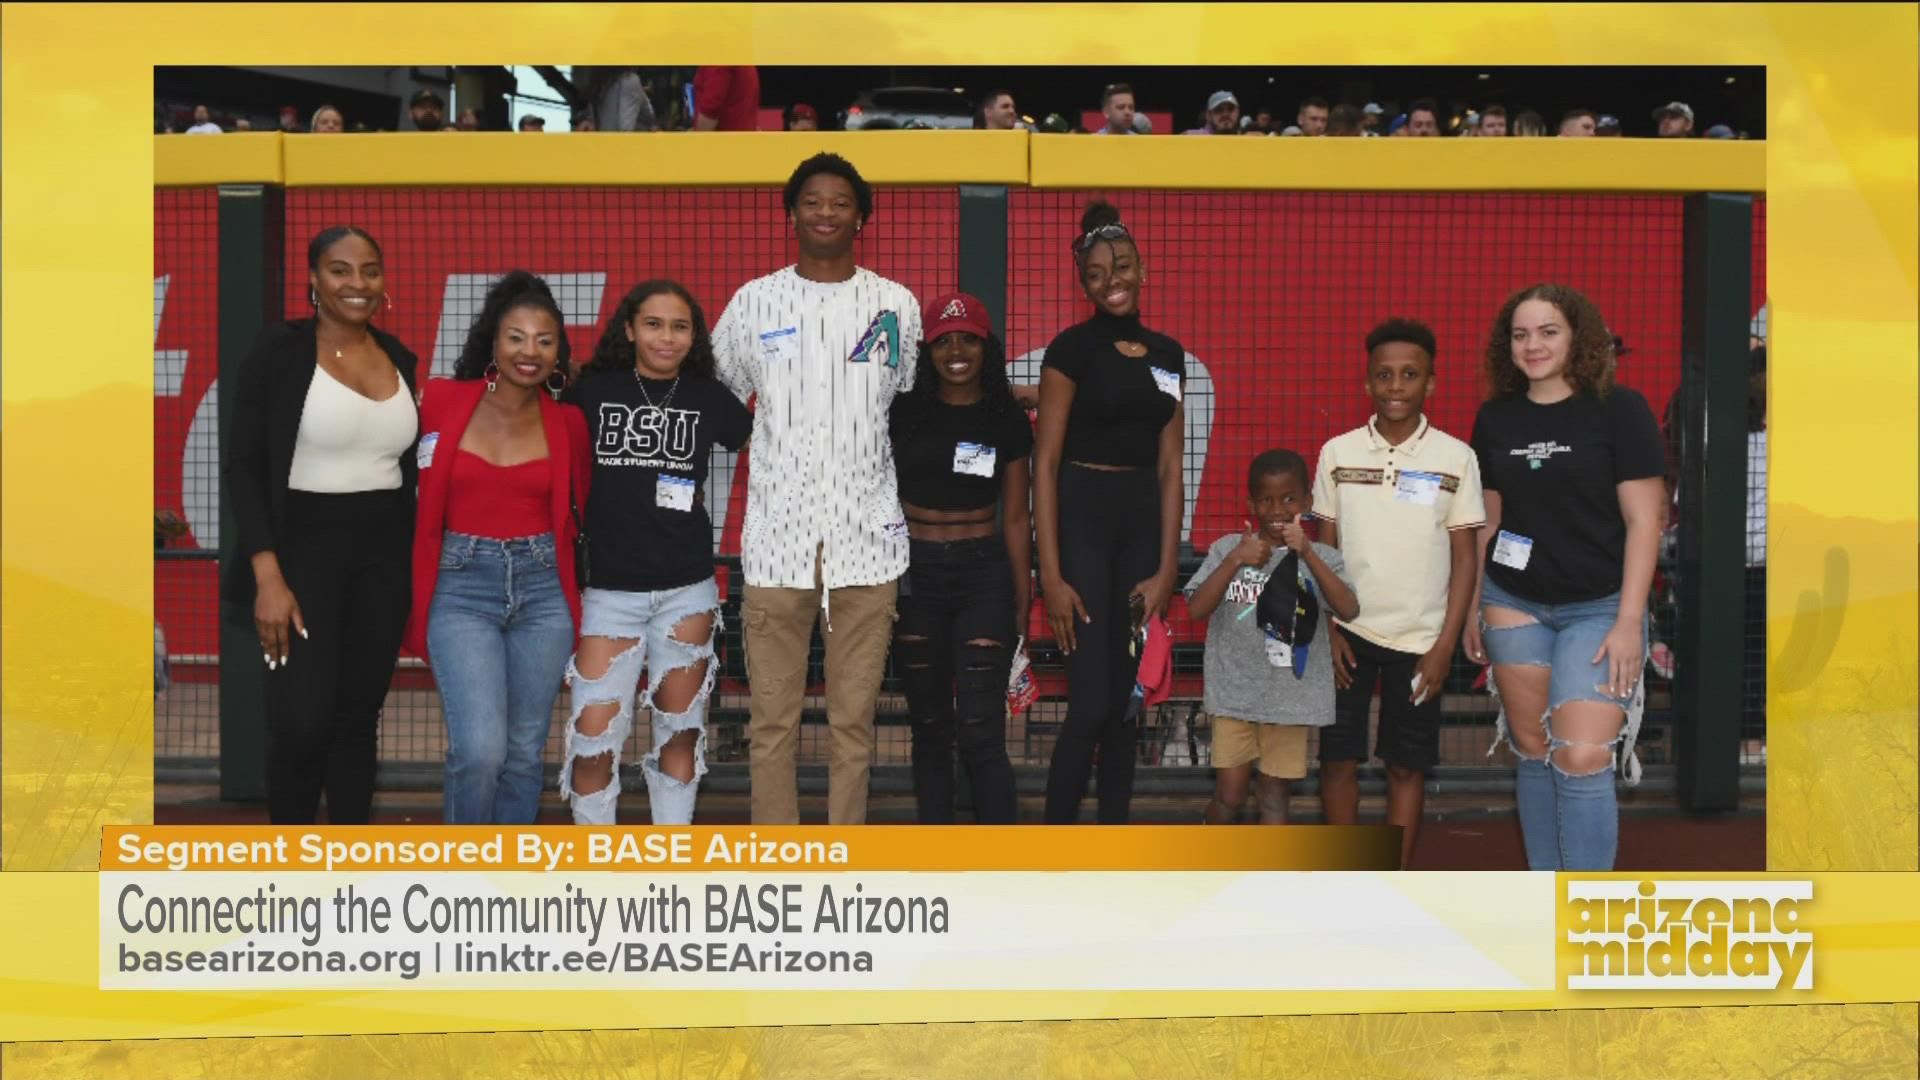 DJ Freshmaker from BASE Arizona talks about the Afro Scouts and BSU Connection programs supporting the Black community in honor of Martin Luther King Jr. Day